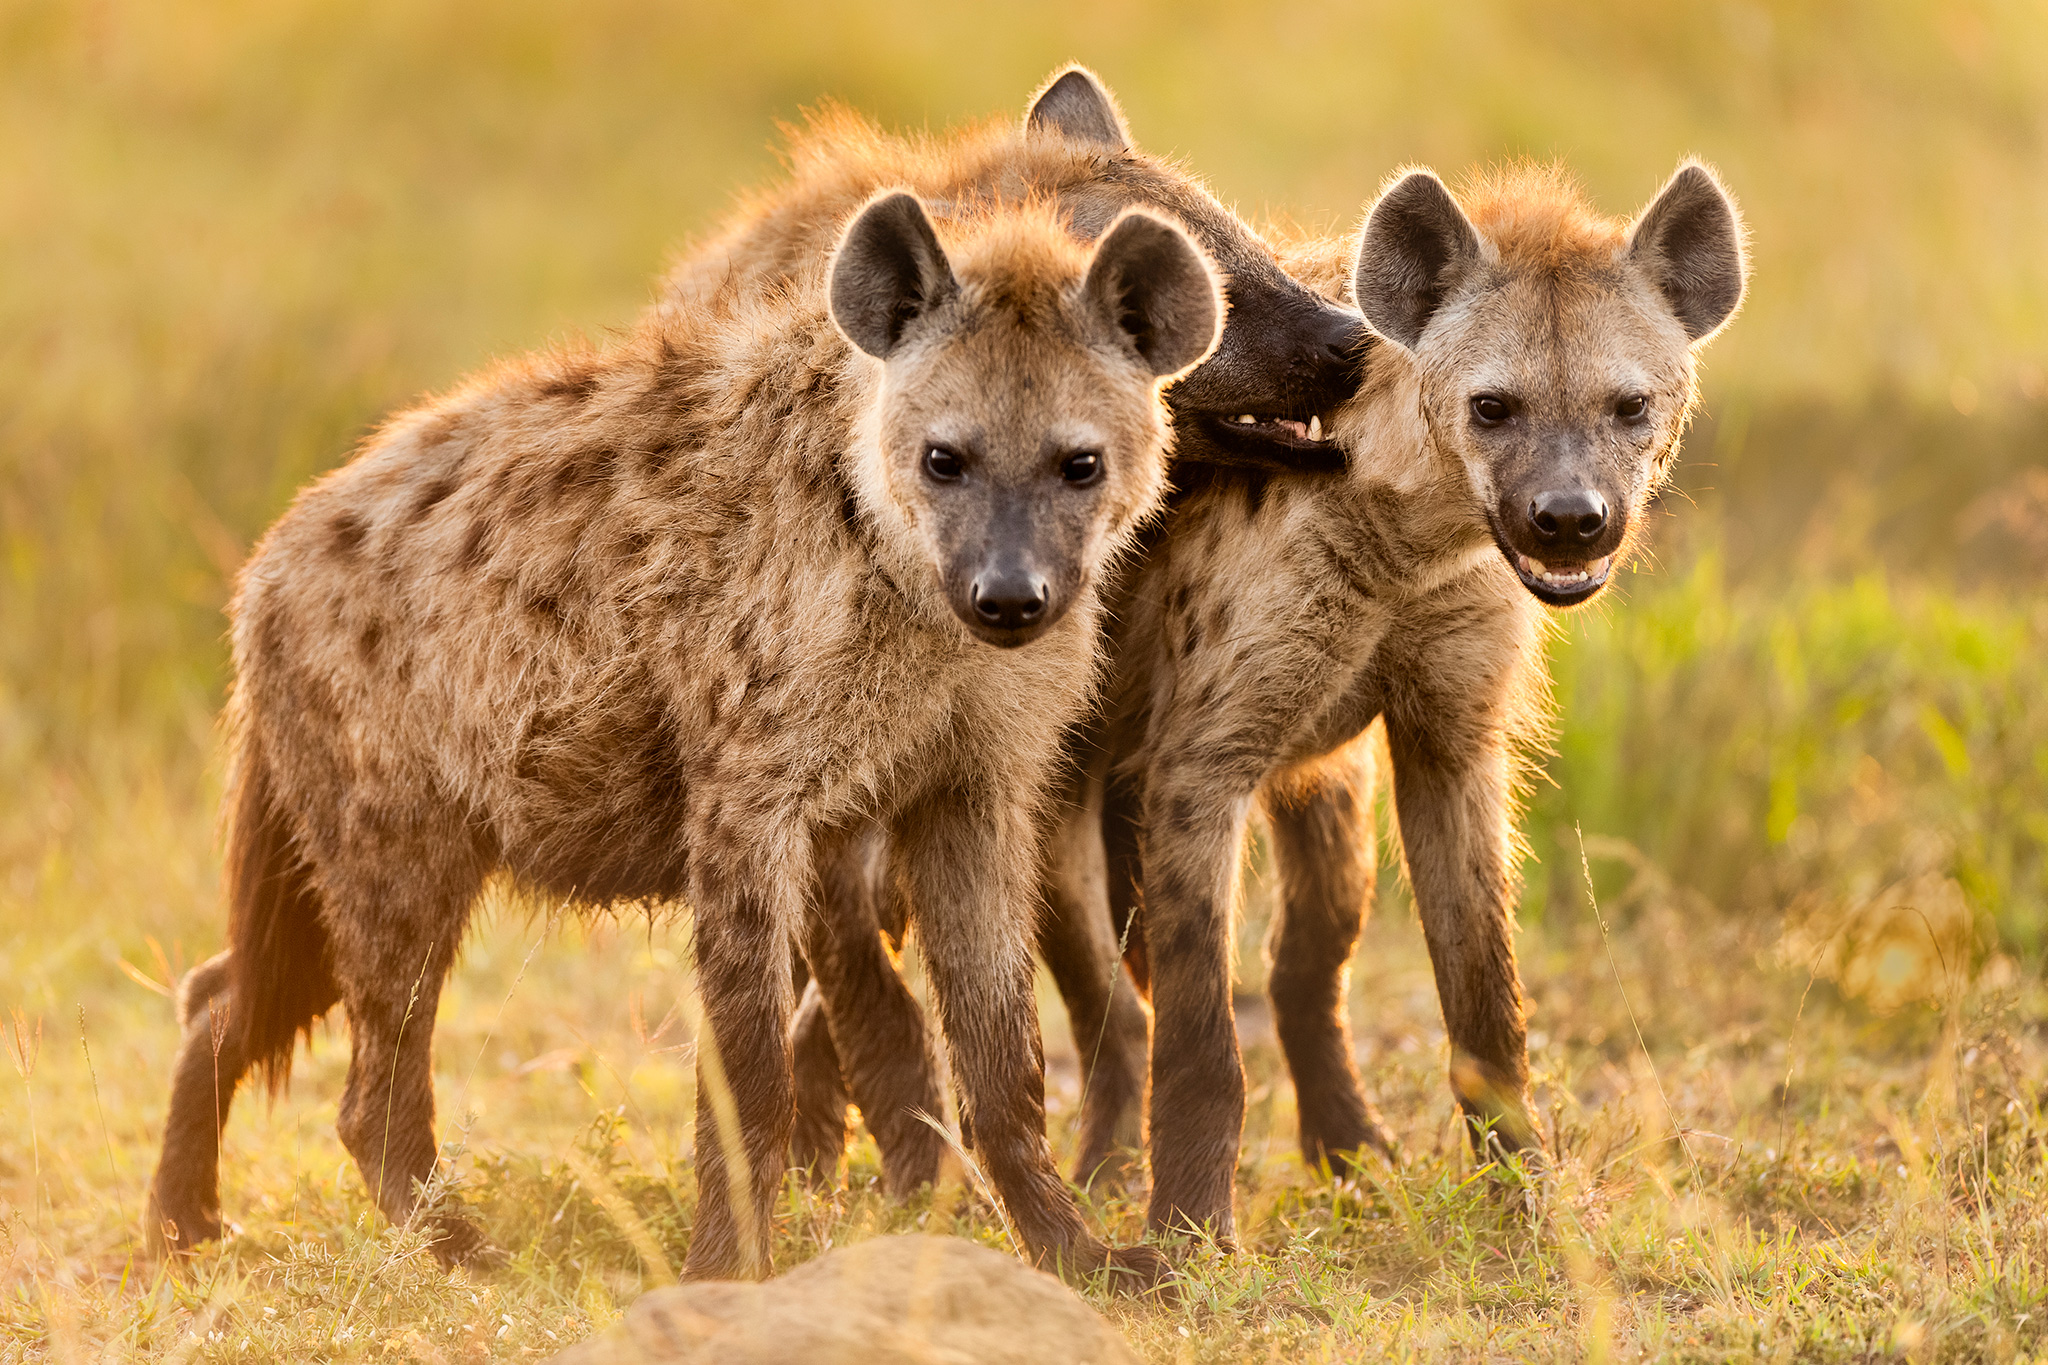 The character of the hyena as a coward is untrue. 